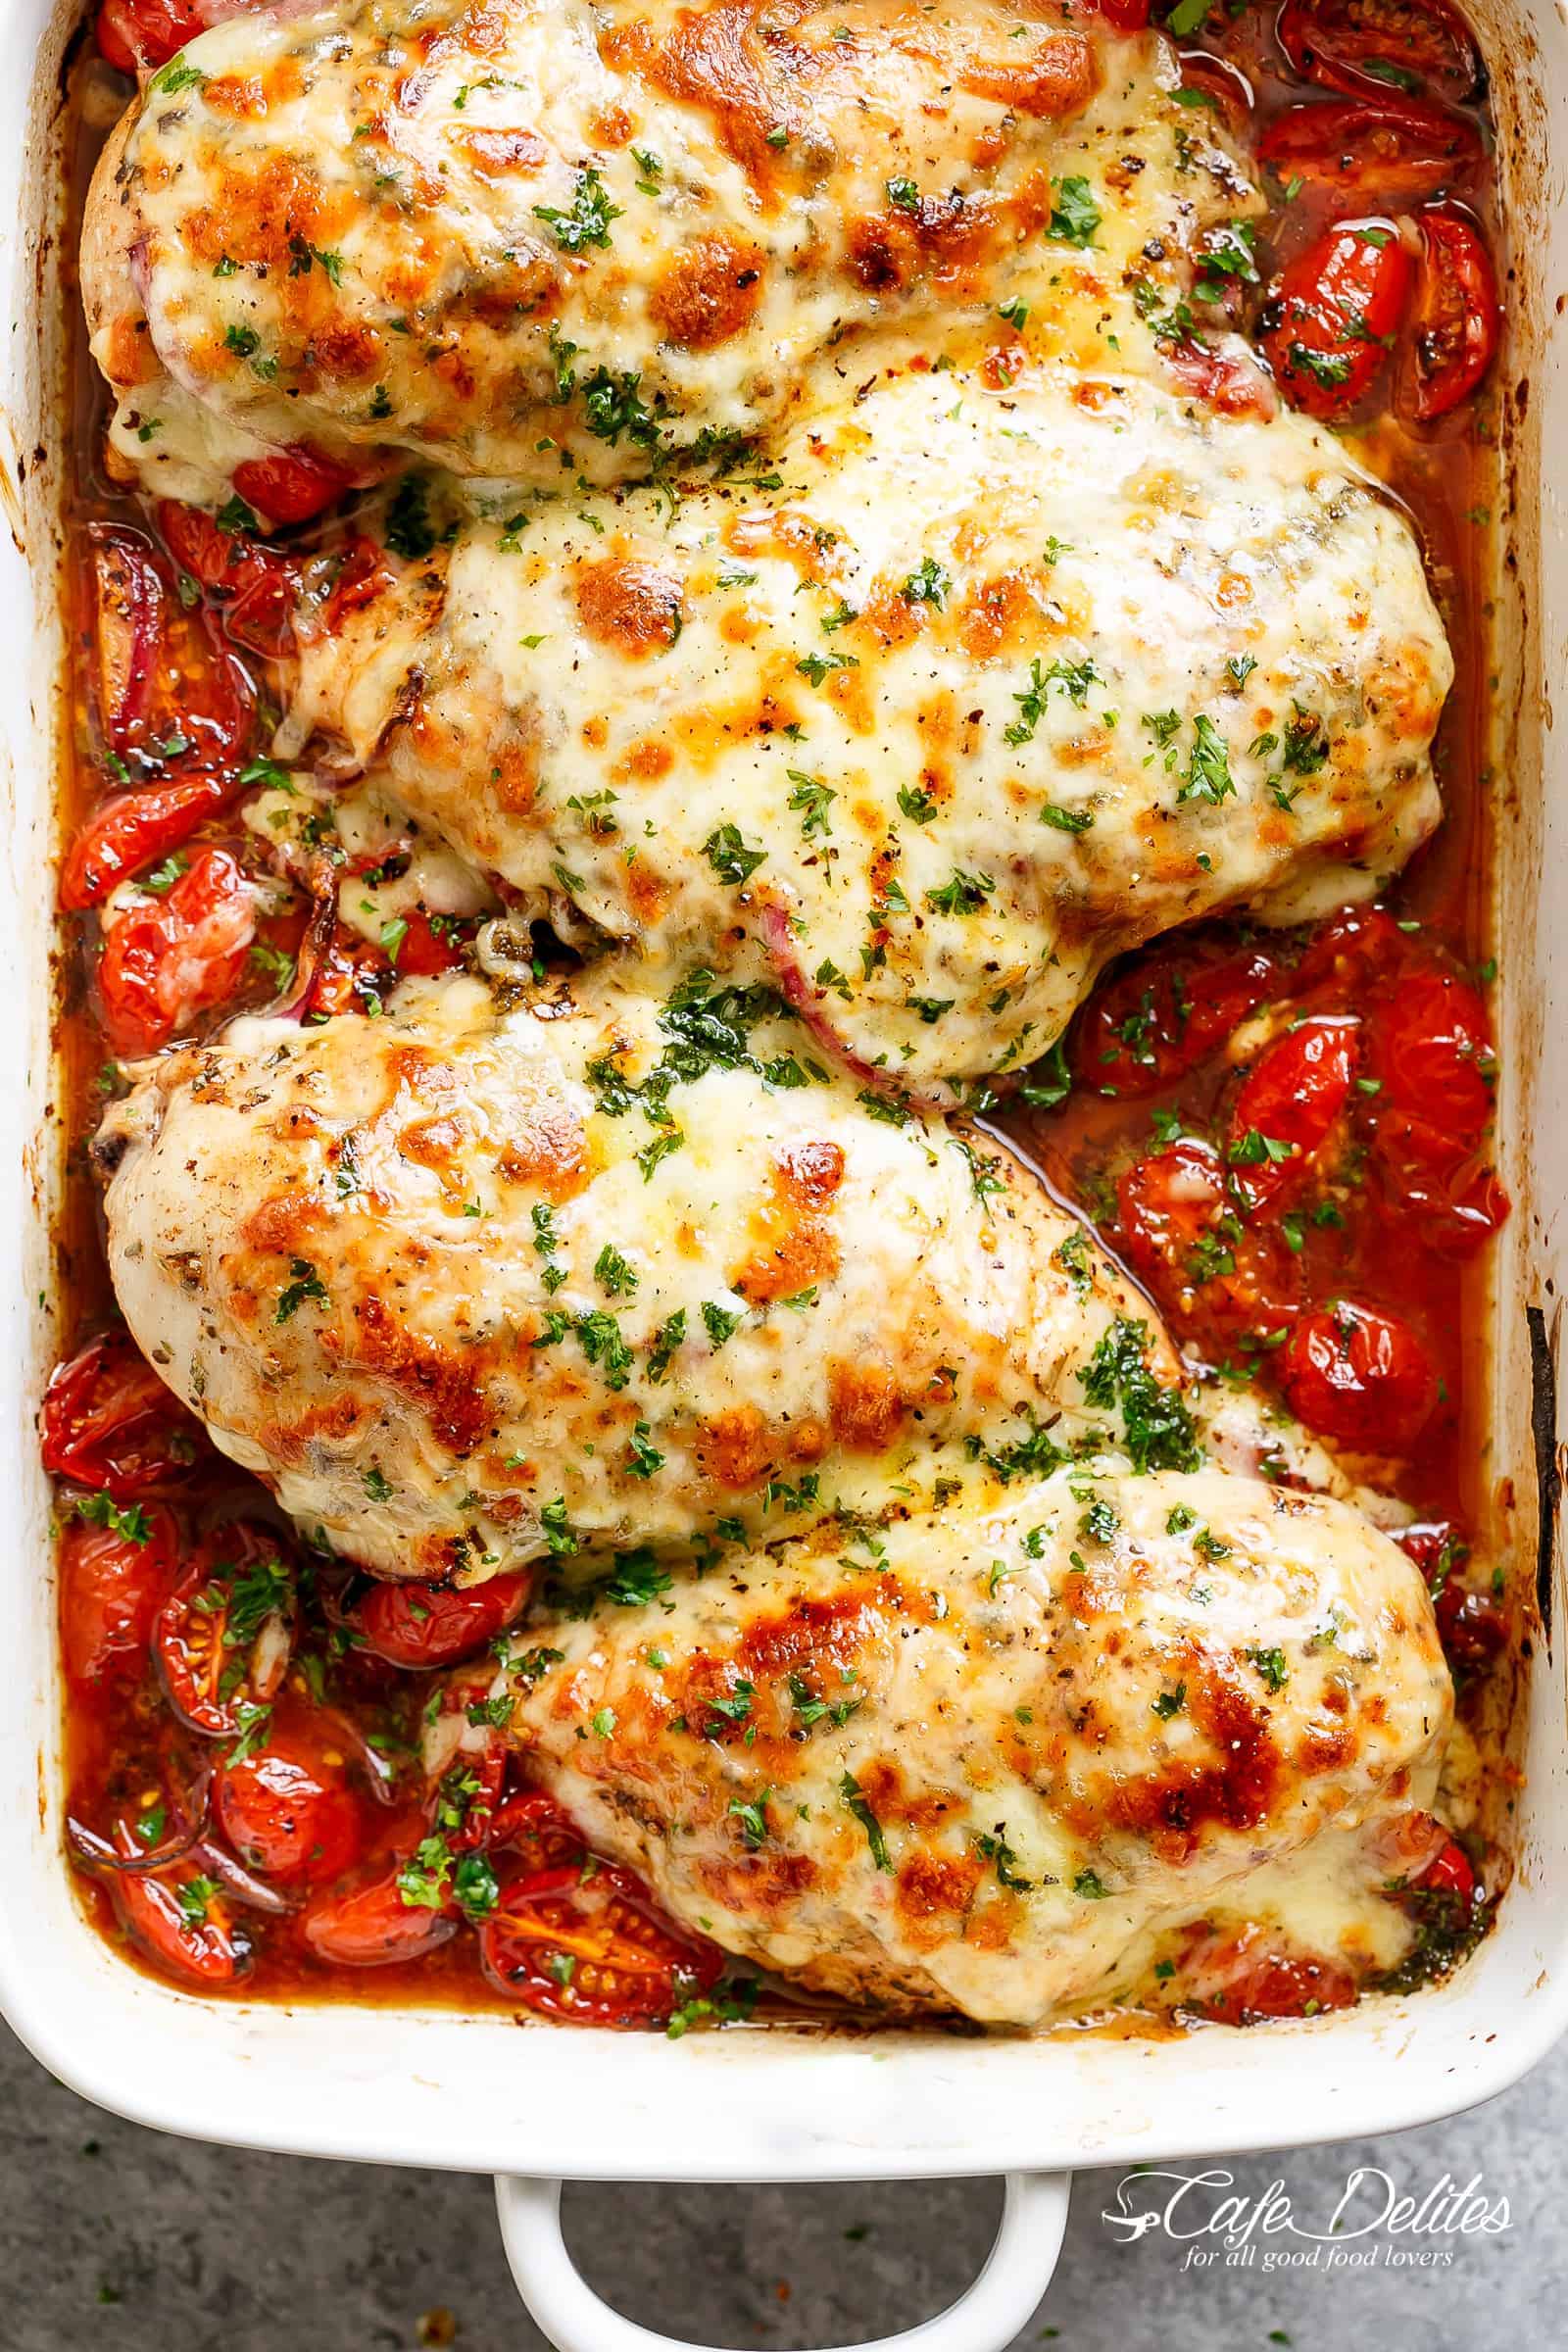 Balsamic Baked Chicken Breast rubbed with garlic and herbs, dripping with a tomato balsamic sauce and melted mozzarella cheese! It doesn't get any better than this EASY chicken recipe! Let your oven do ALL the work and have the most delicious Baked Chicken on your table in less than 30 minutes! | https://cafedelites.com